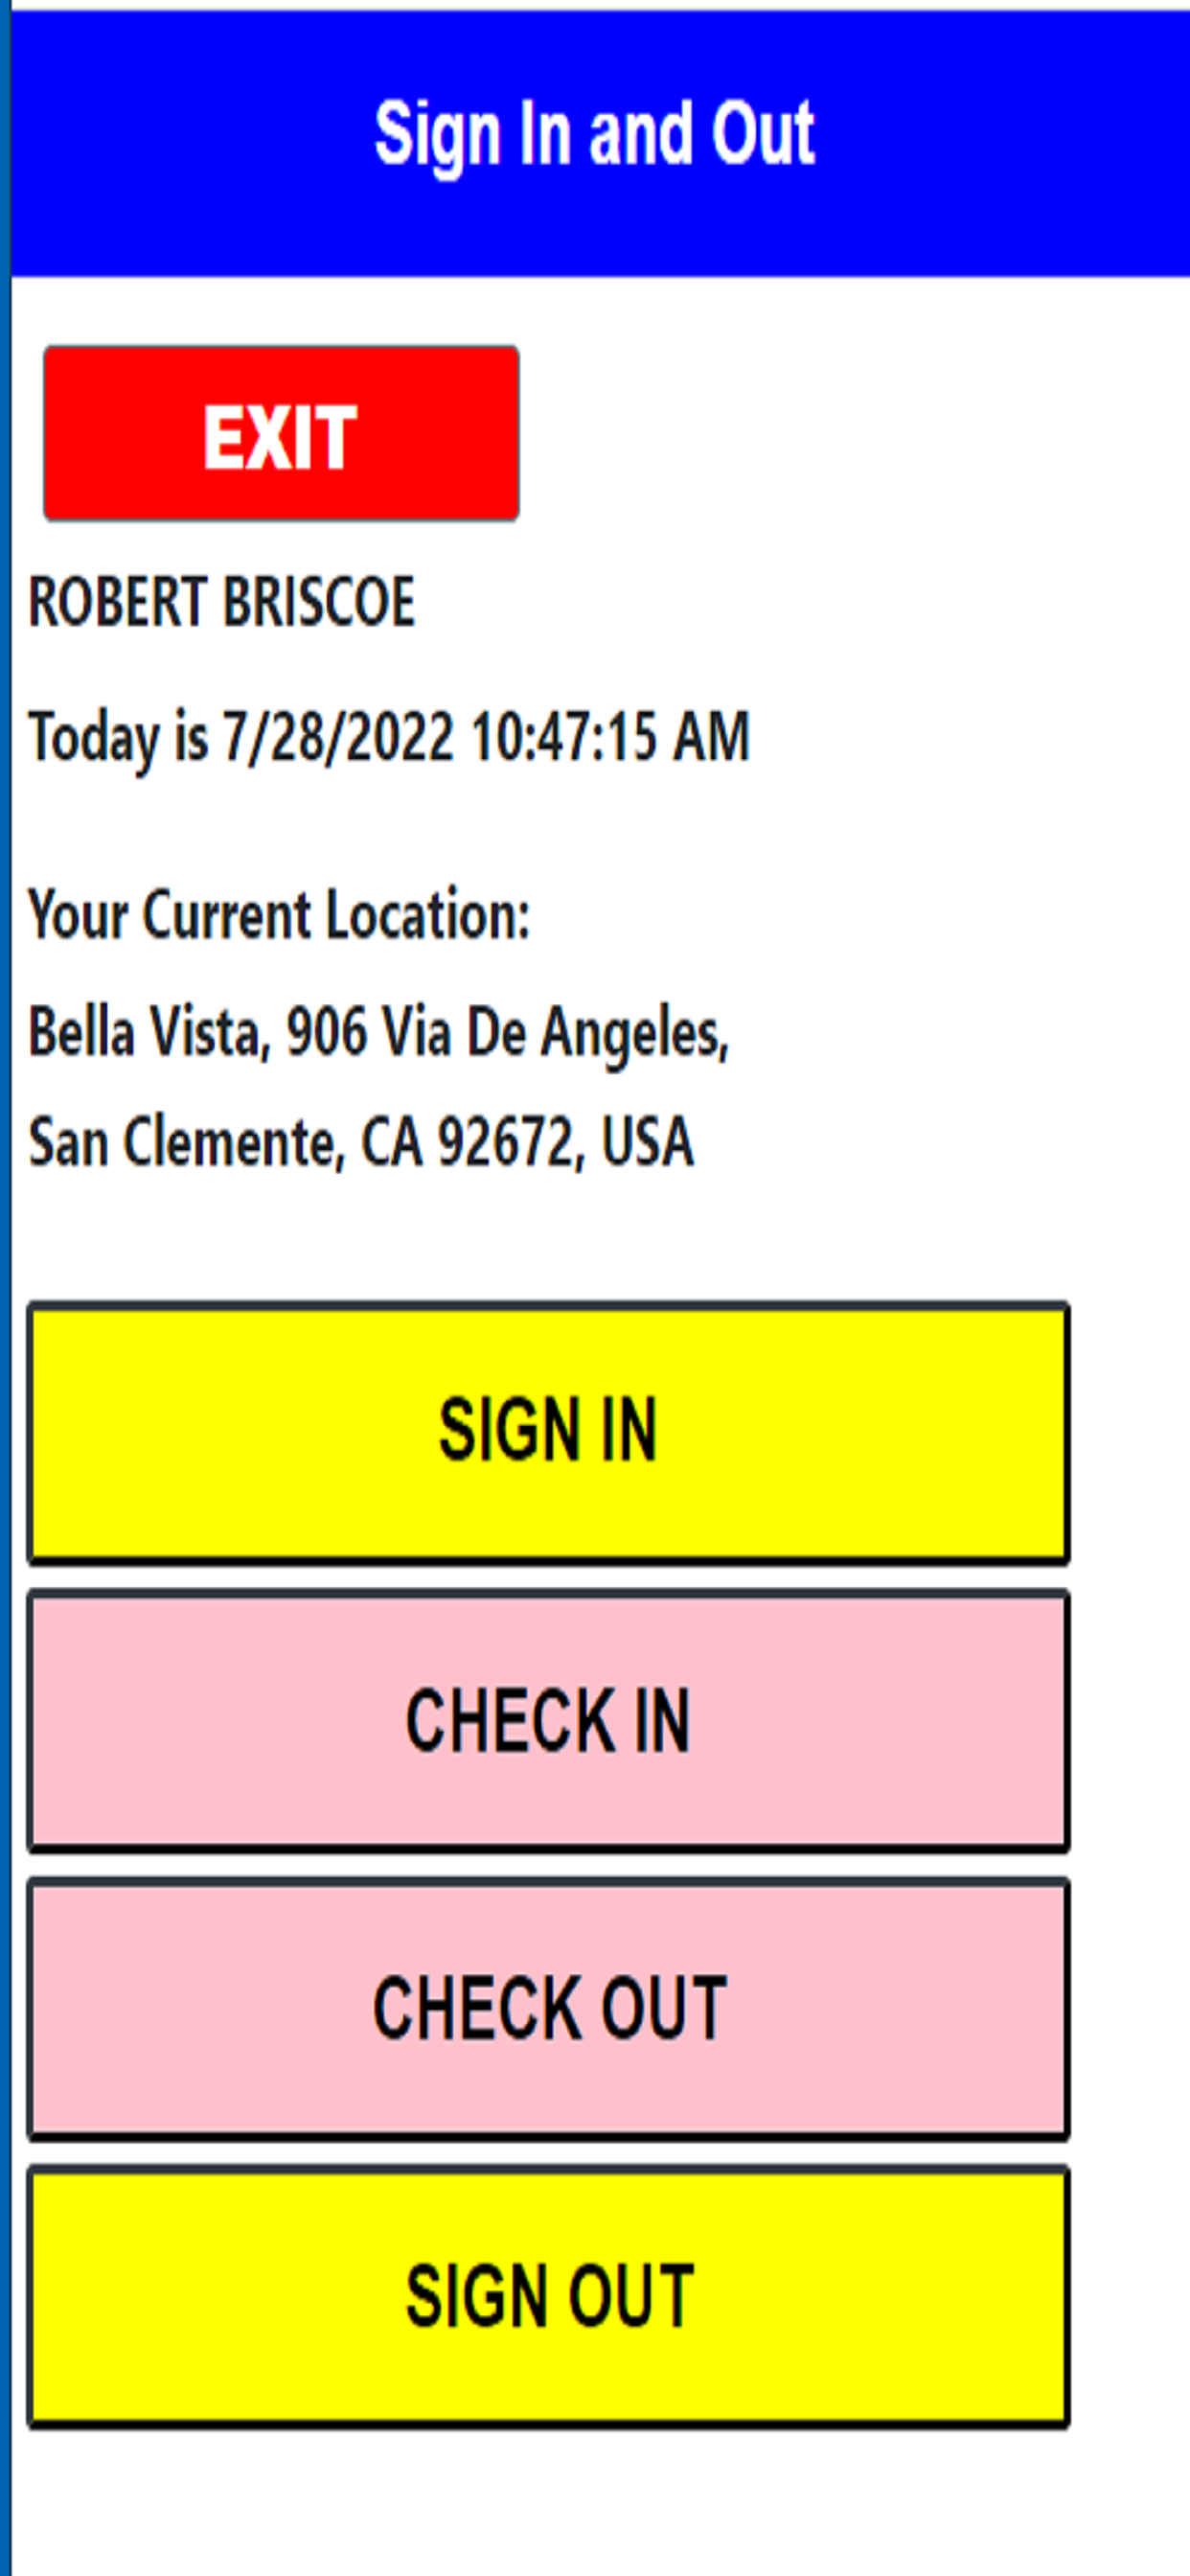 System allows CHECK IN/ CHECK OUT buttons for multiple locations during the day